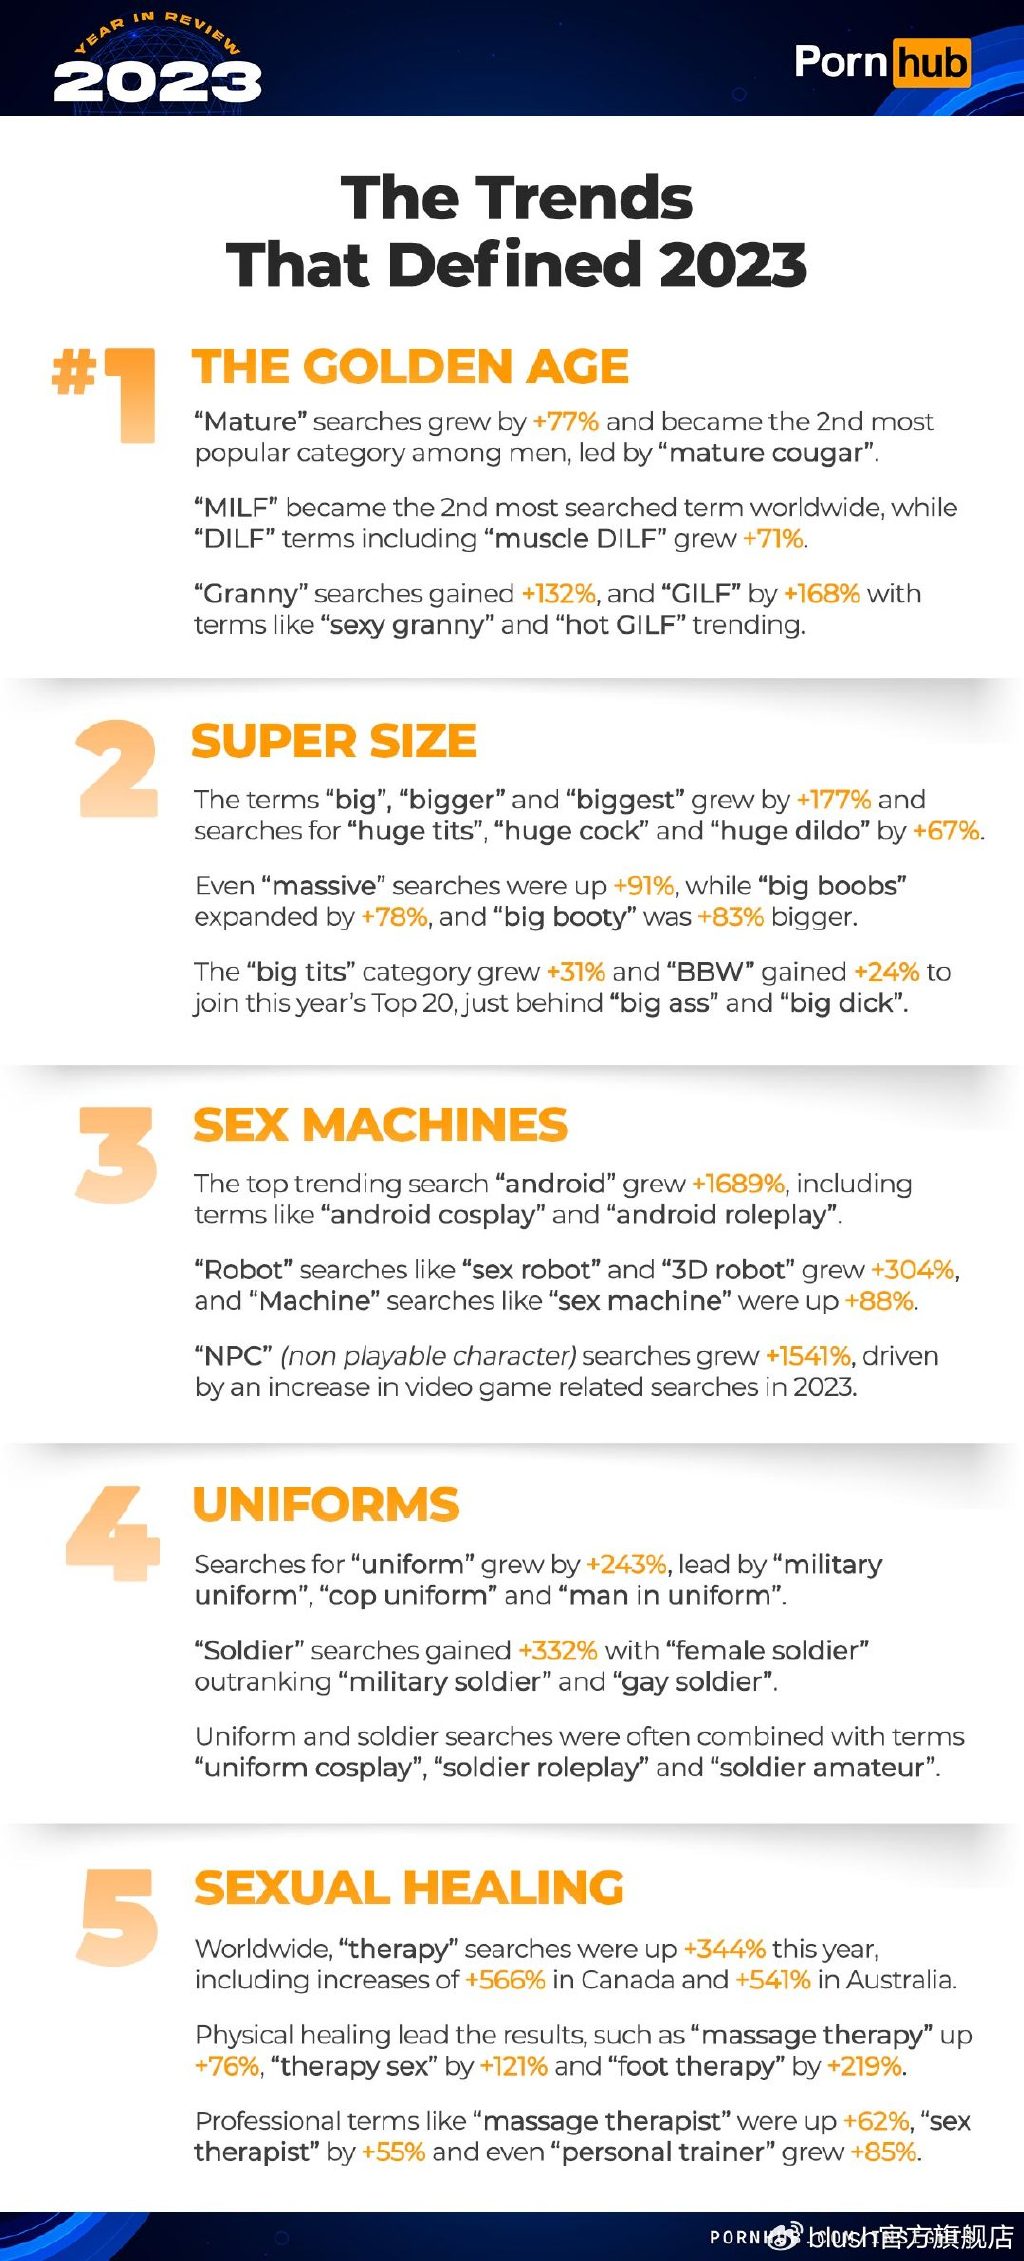 pornhub-insights-2023-year-in-review-trends-that-defined-2023.jpg